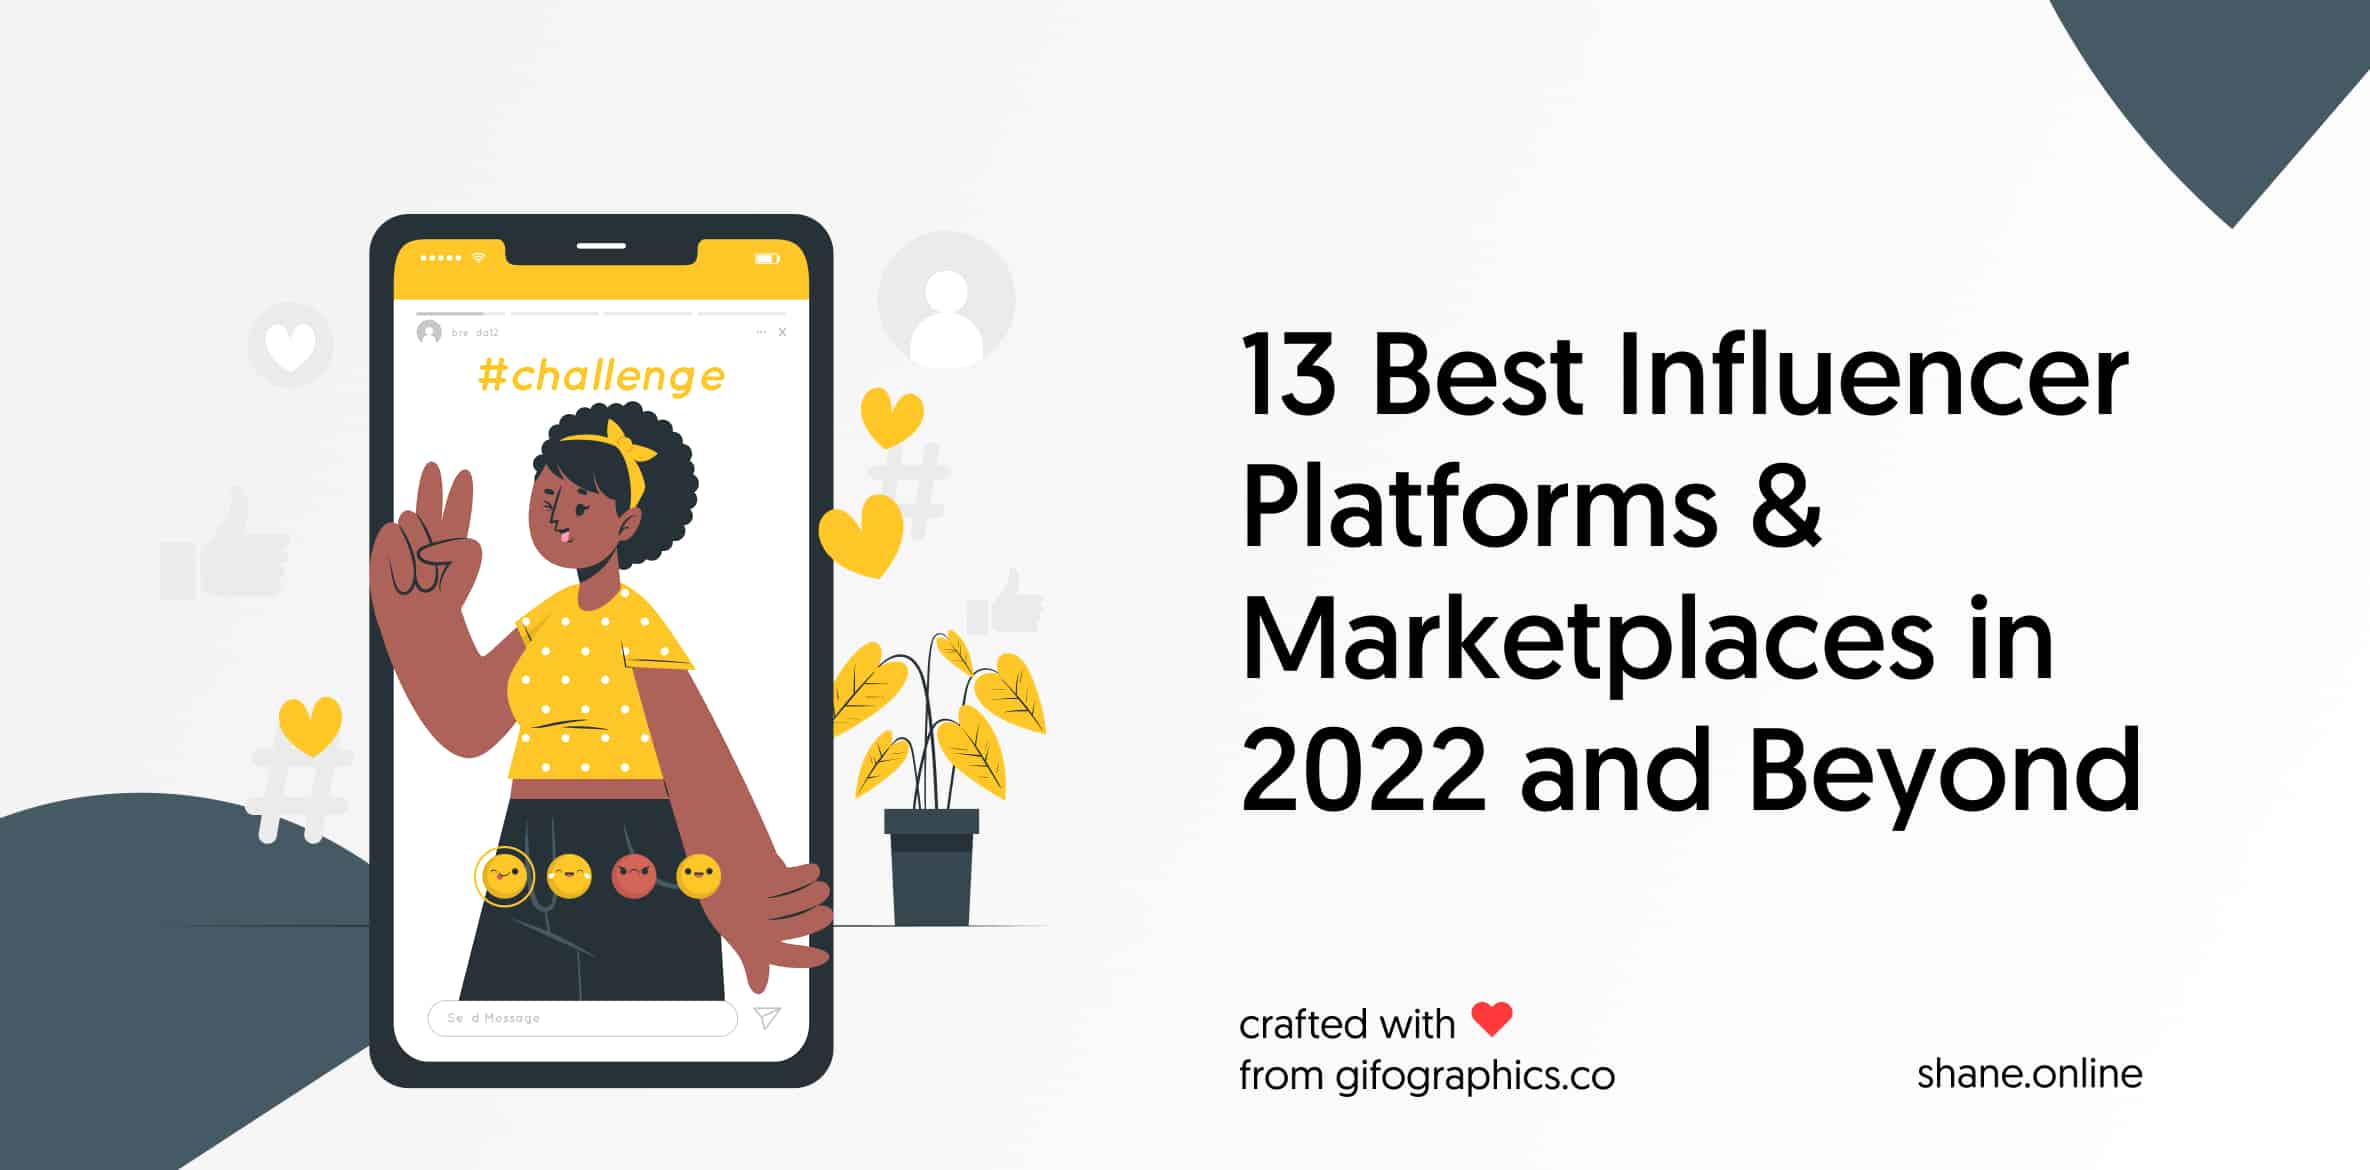 13 Best Influencer Platforms & Marketplaces in 2022 and Beyond